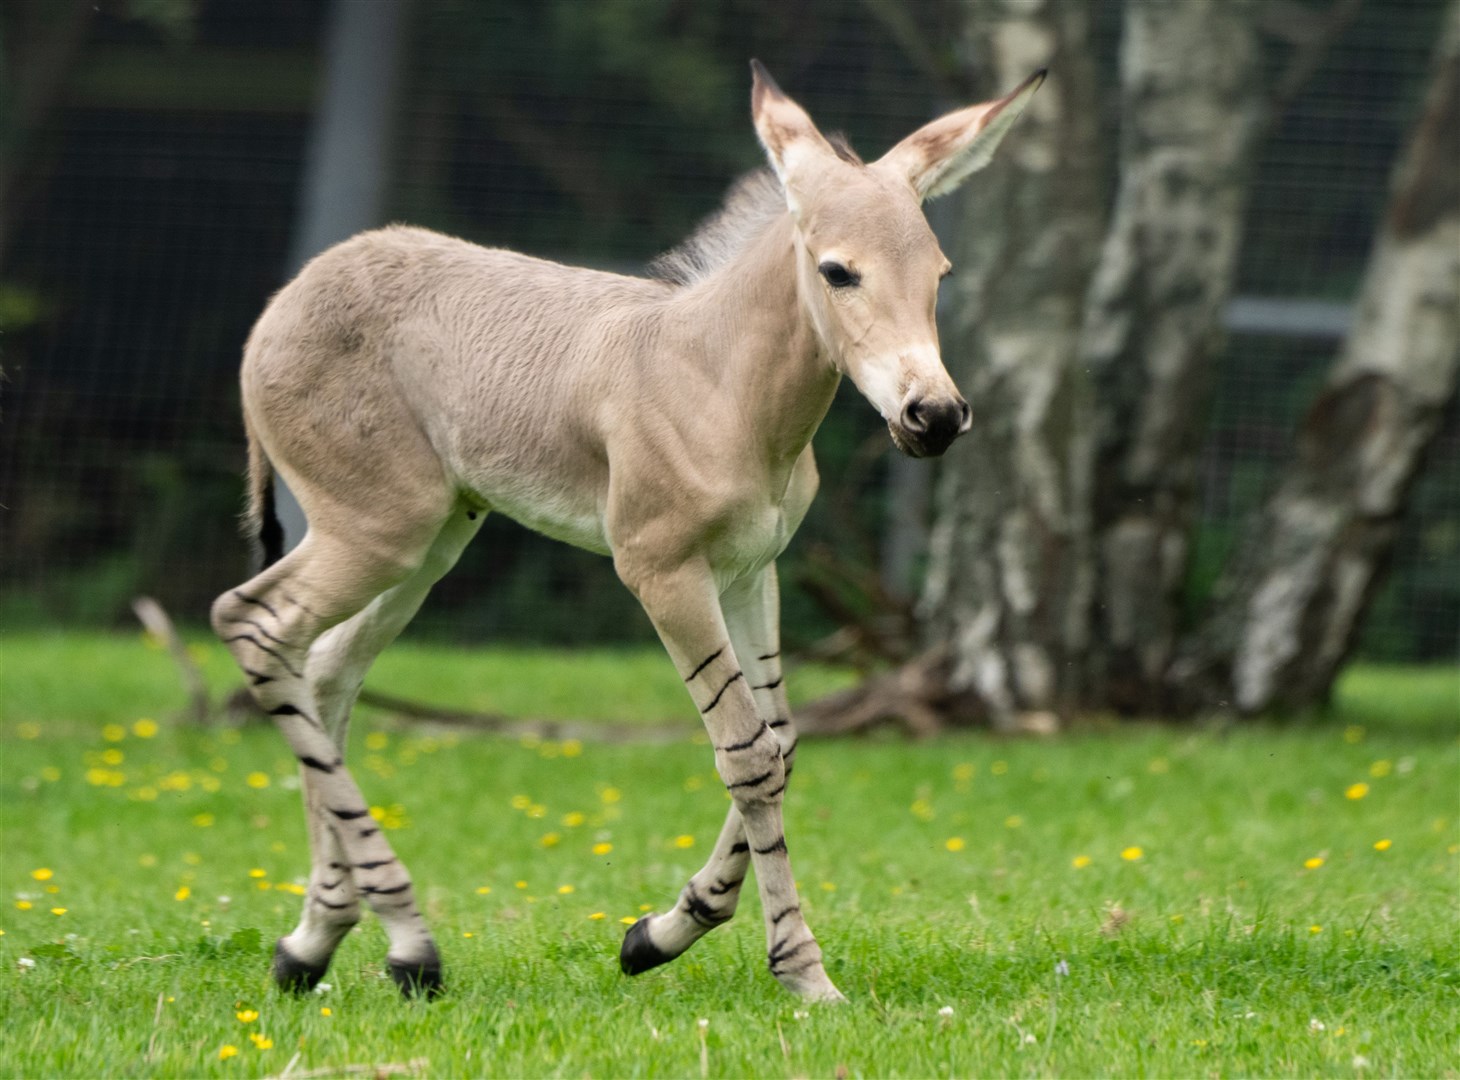 The newly-born foal does not have a name yet (Marwell Zoo/PA)